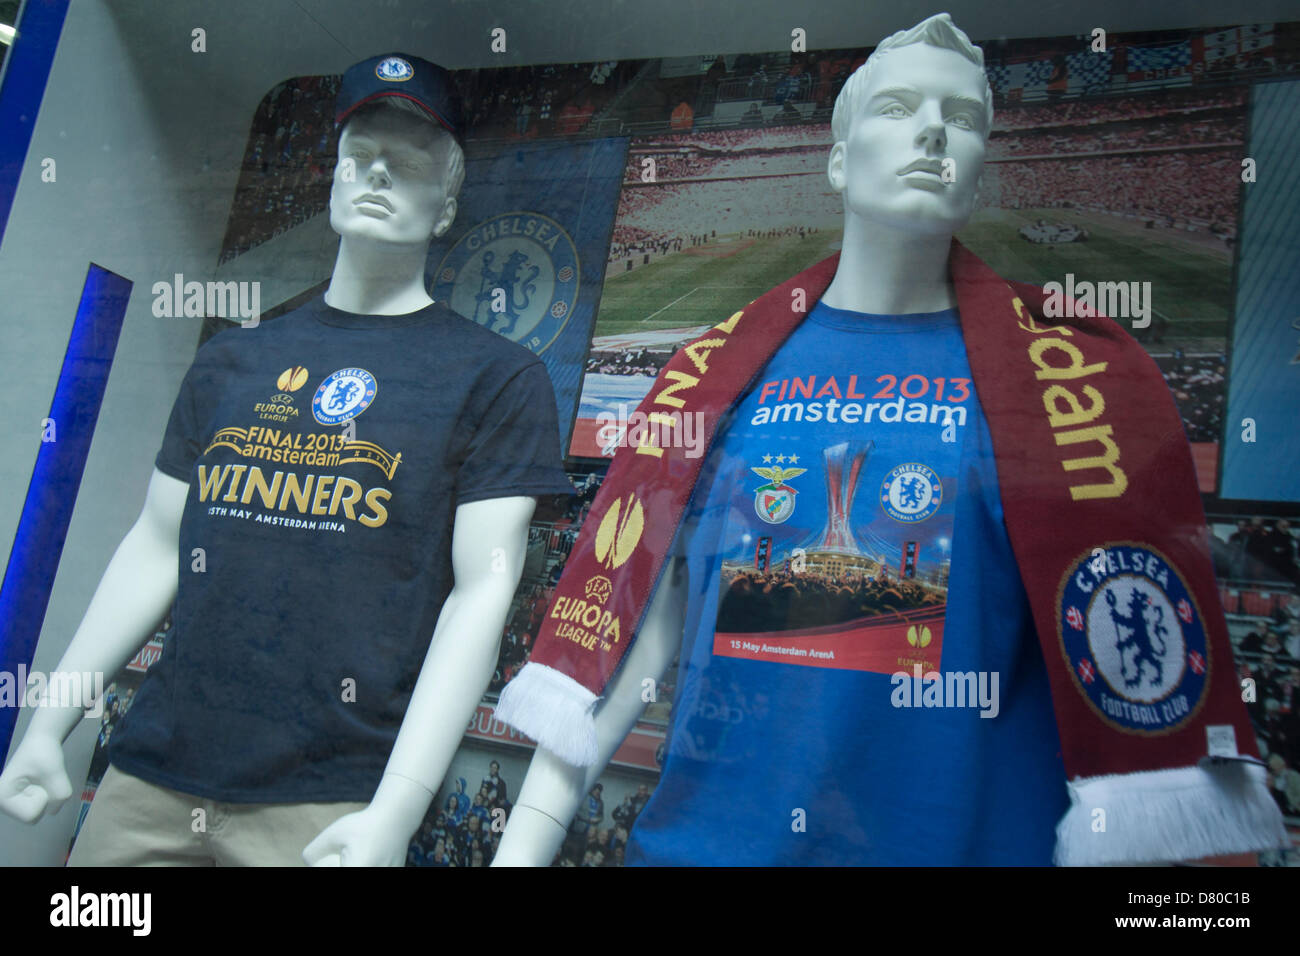 London UK. 16th May 2013. Mannequins dressed in Europa League winners shirts at the Chelsea store after Chelsea FC wins the Europa League final against Benfica in Amsterdam on May 15th. Credit:  amer ghazzal / Alamy Live News Stock Photo